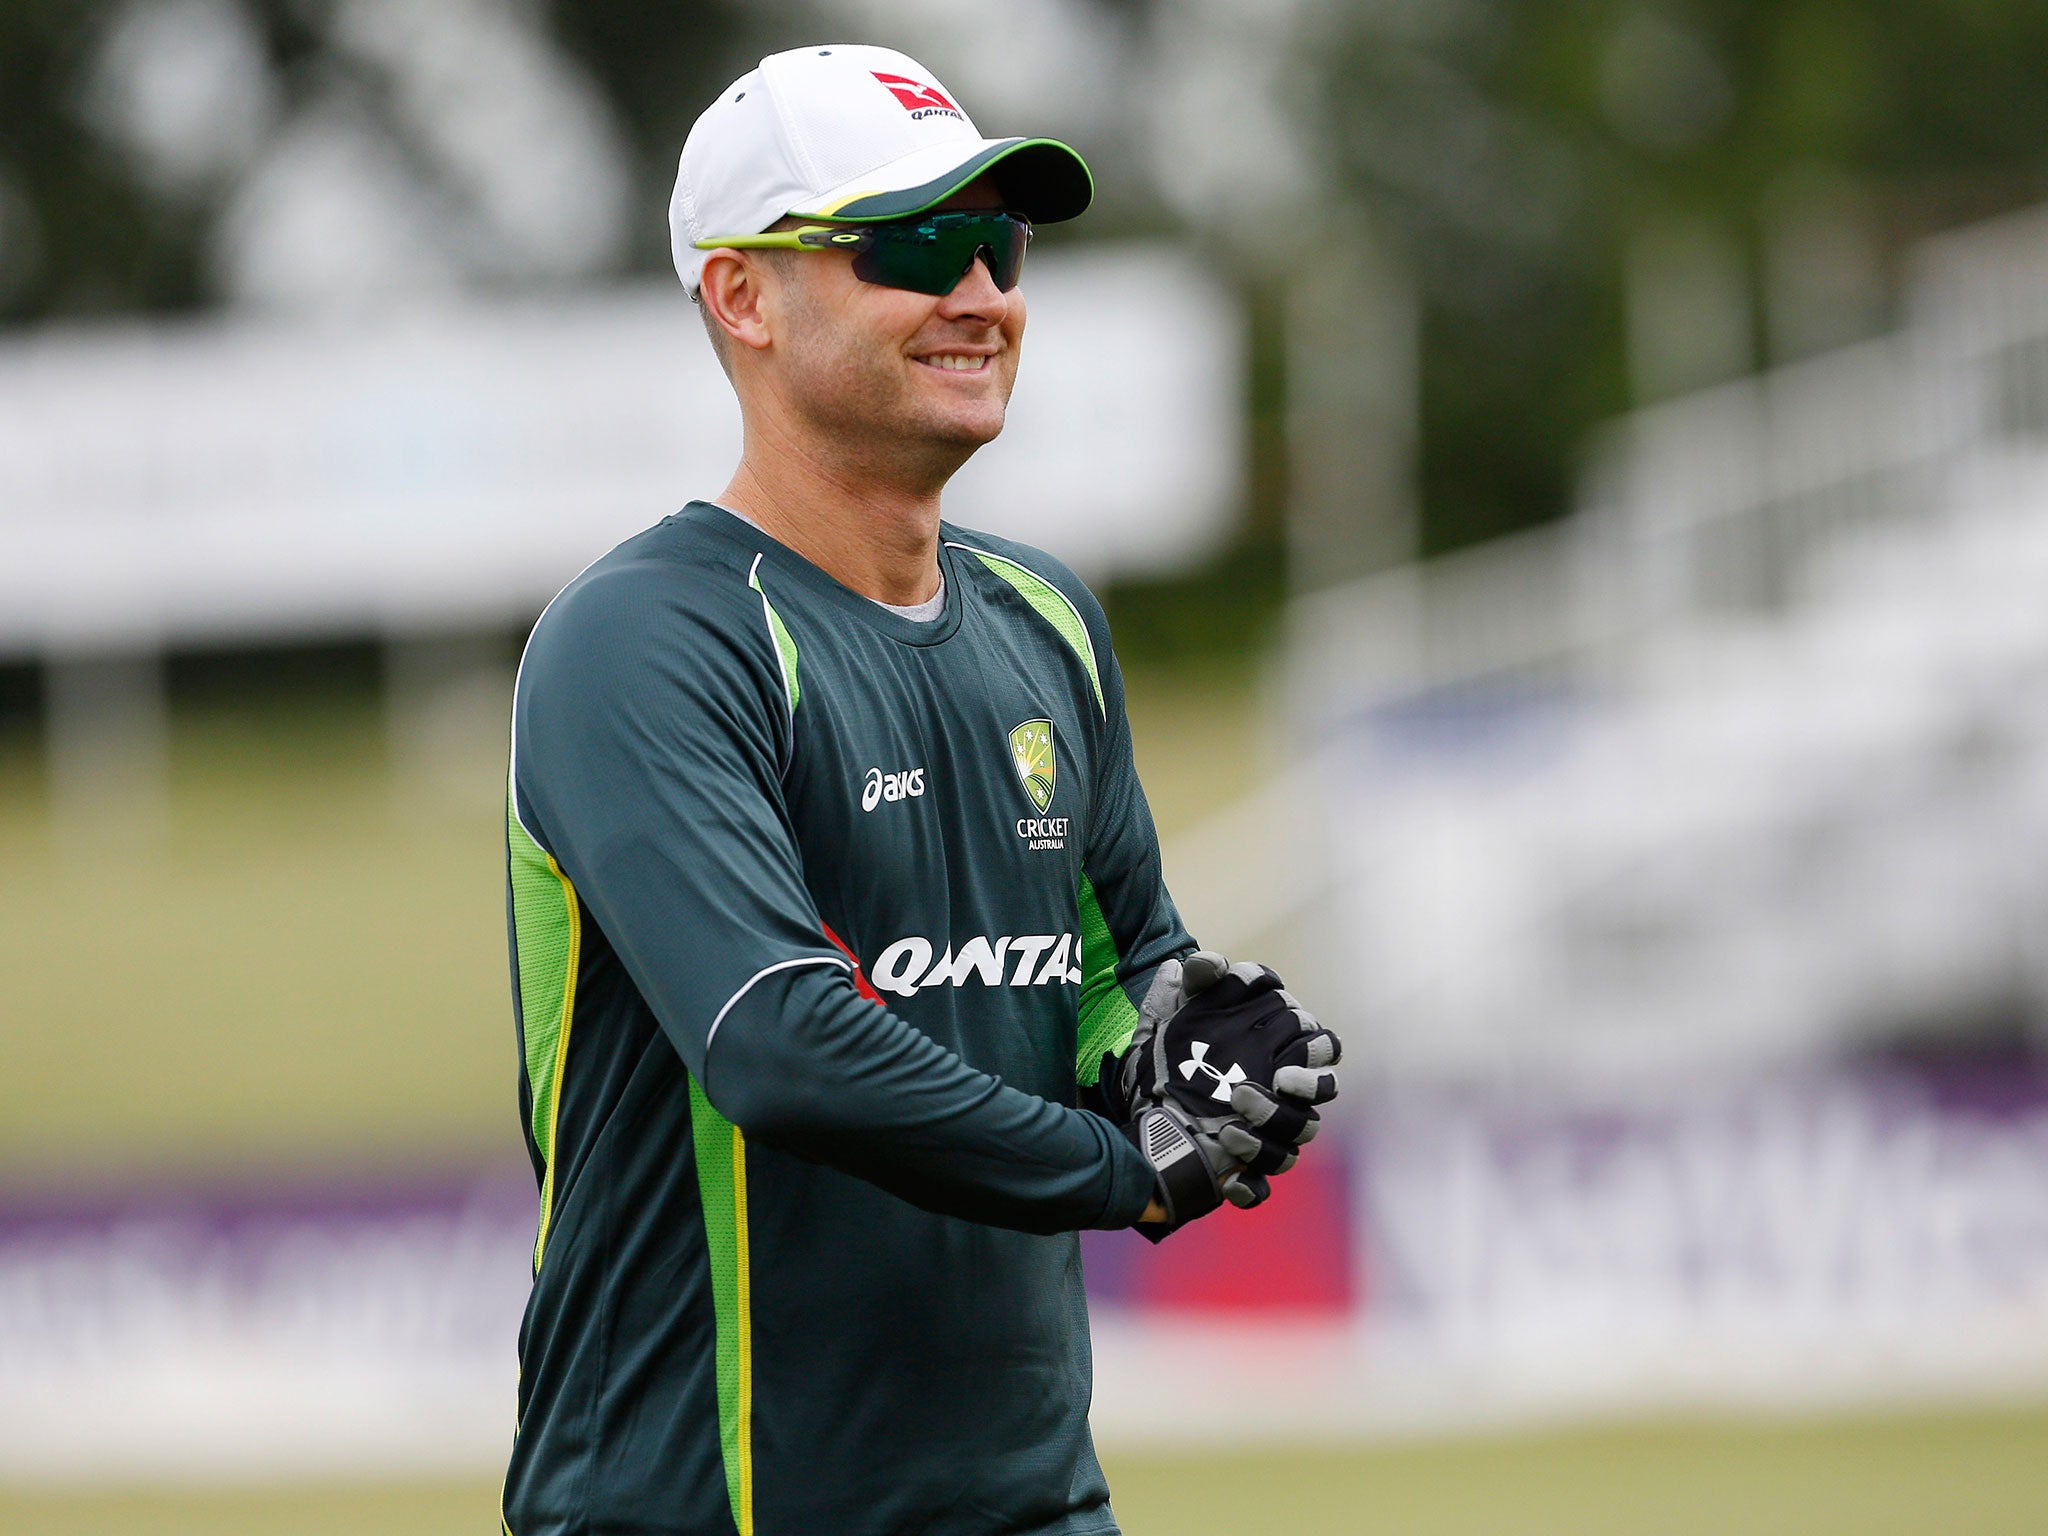 Michael Clarke has made only two centuries in his last 26 Test innings for Australia